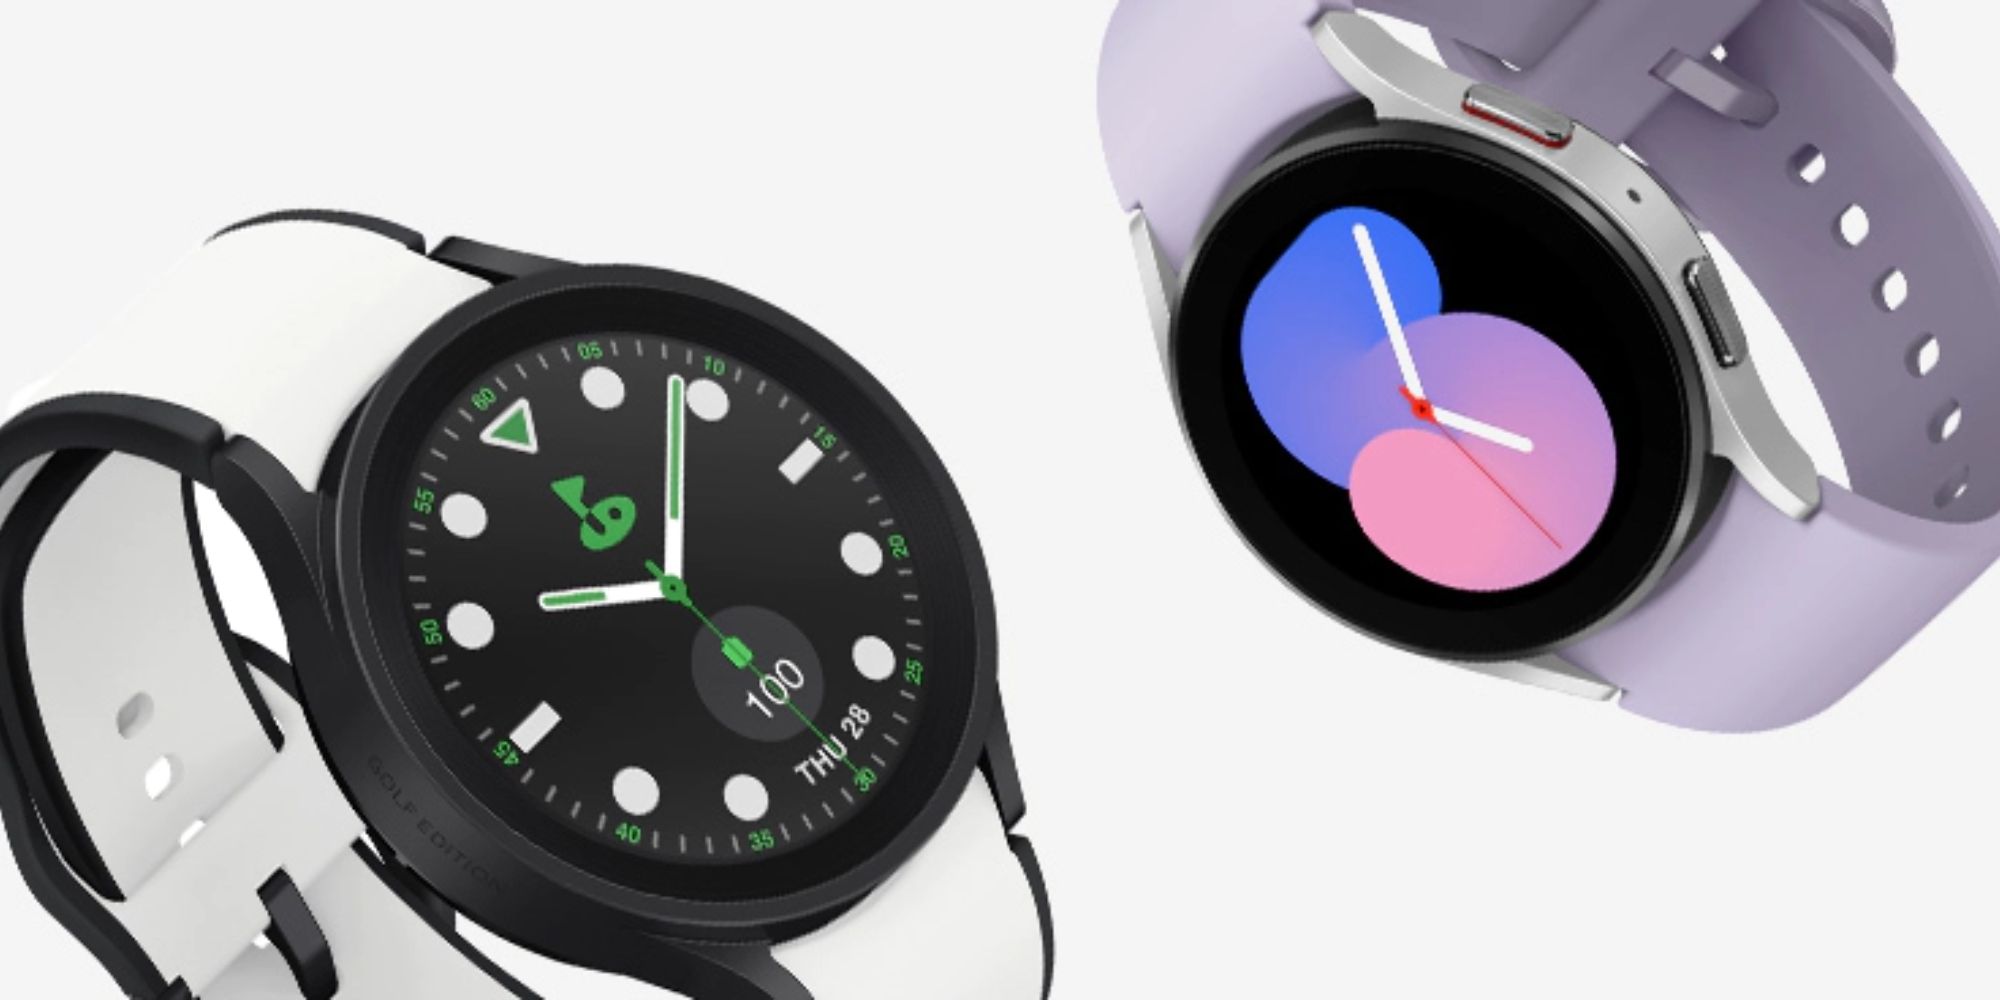 Image of the Samsung Galaxy Watch 5 and the Watch 5 Pro